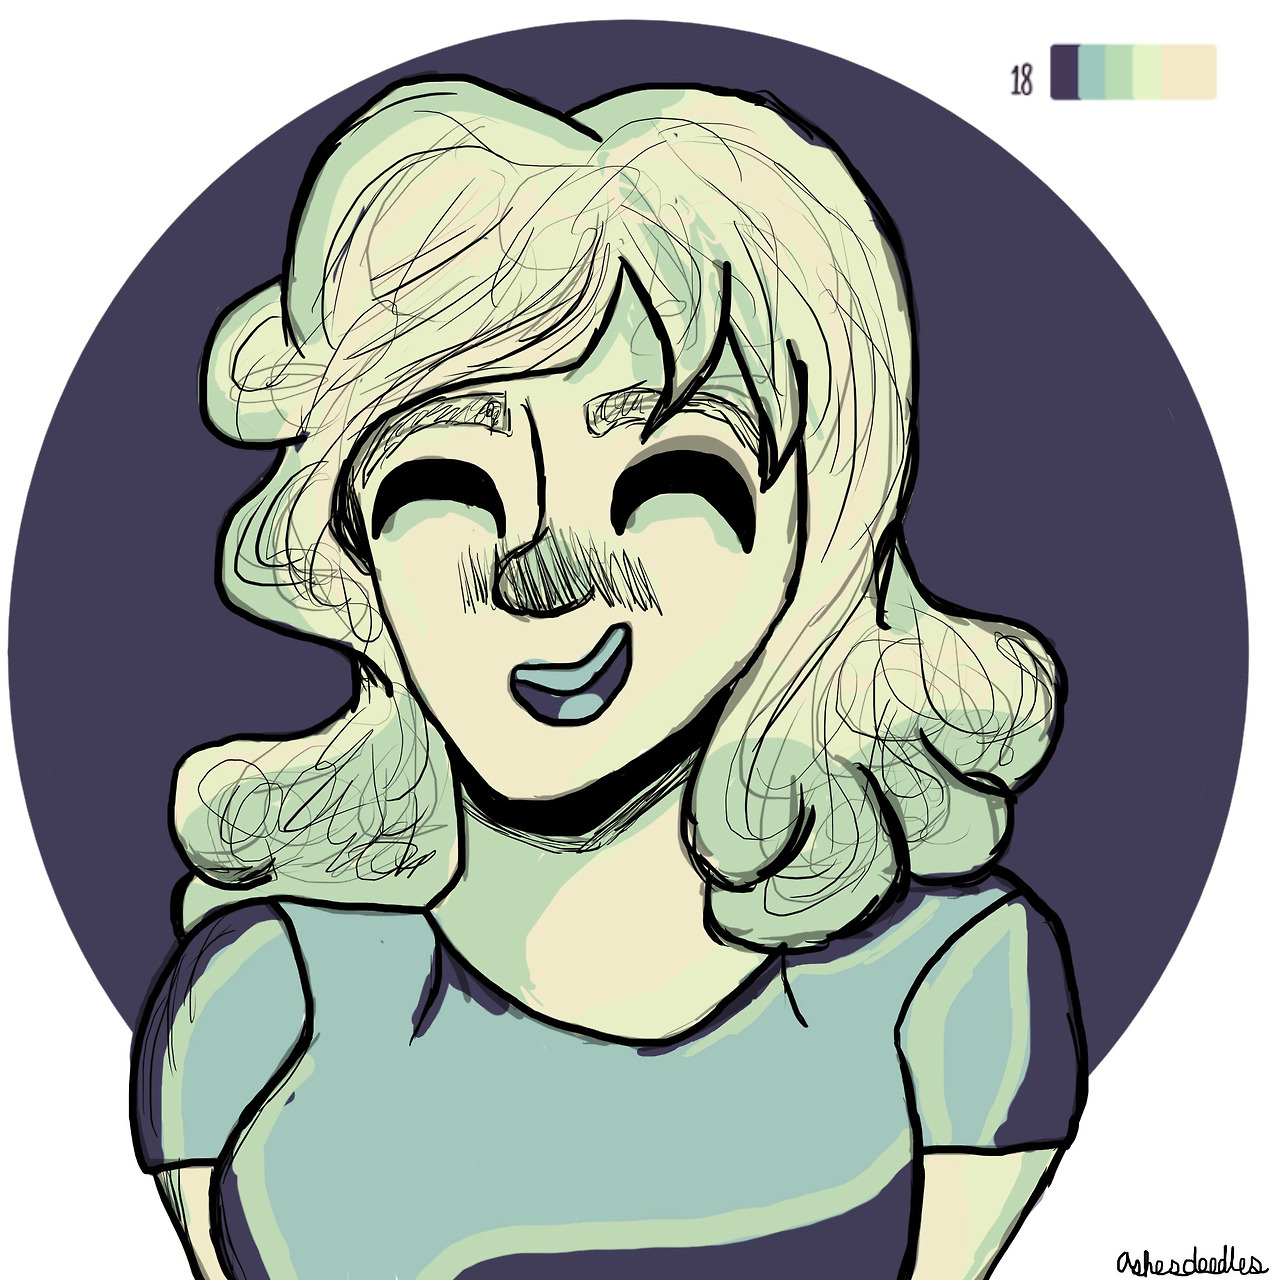 Sadie Miller and 18 for the color palette challenge! Requested by @azarathianscribbles